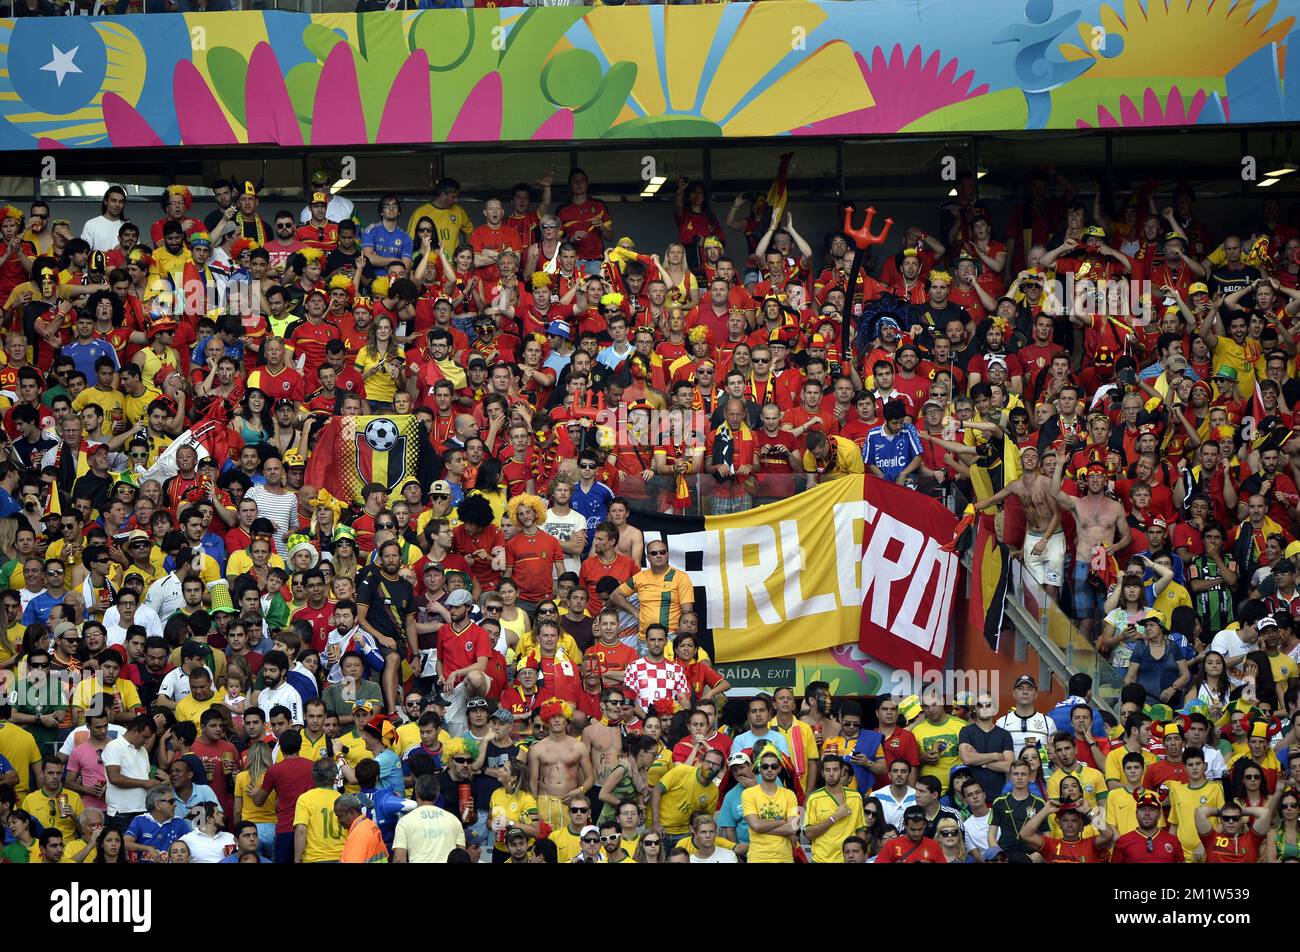 Belgium's supporters pictured at a soccer game between Belgian national team The Red Devils and Algeria in Belo Horizonte, Brazil, the first game in Group H of the first round of the 2014 FIFA World Cup, Tuesday 17 June 2014.  Stock Photo